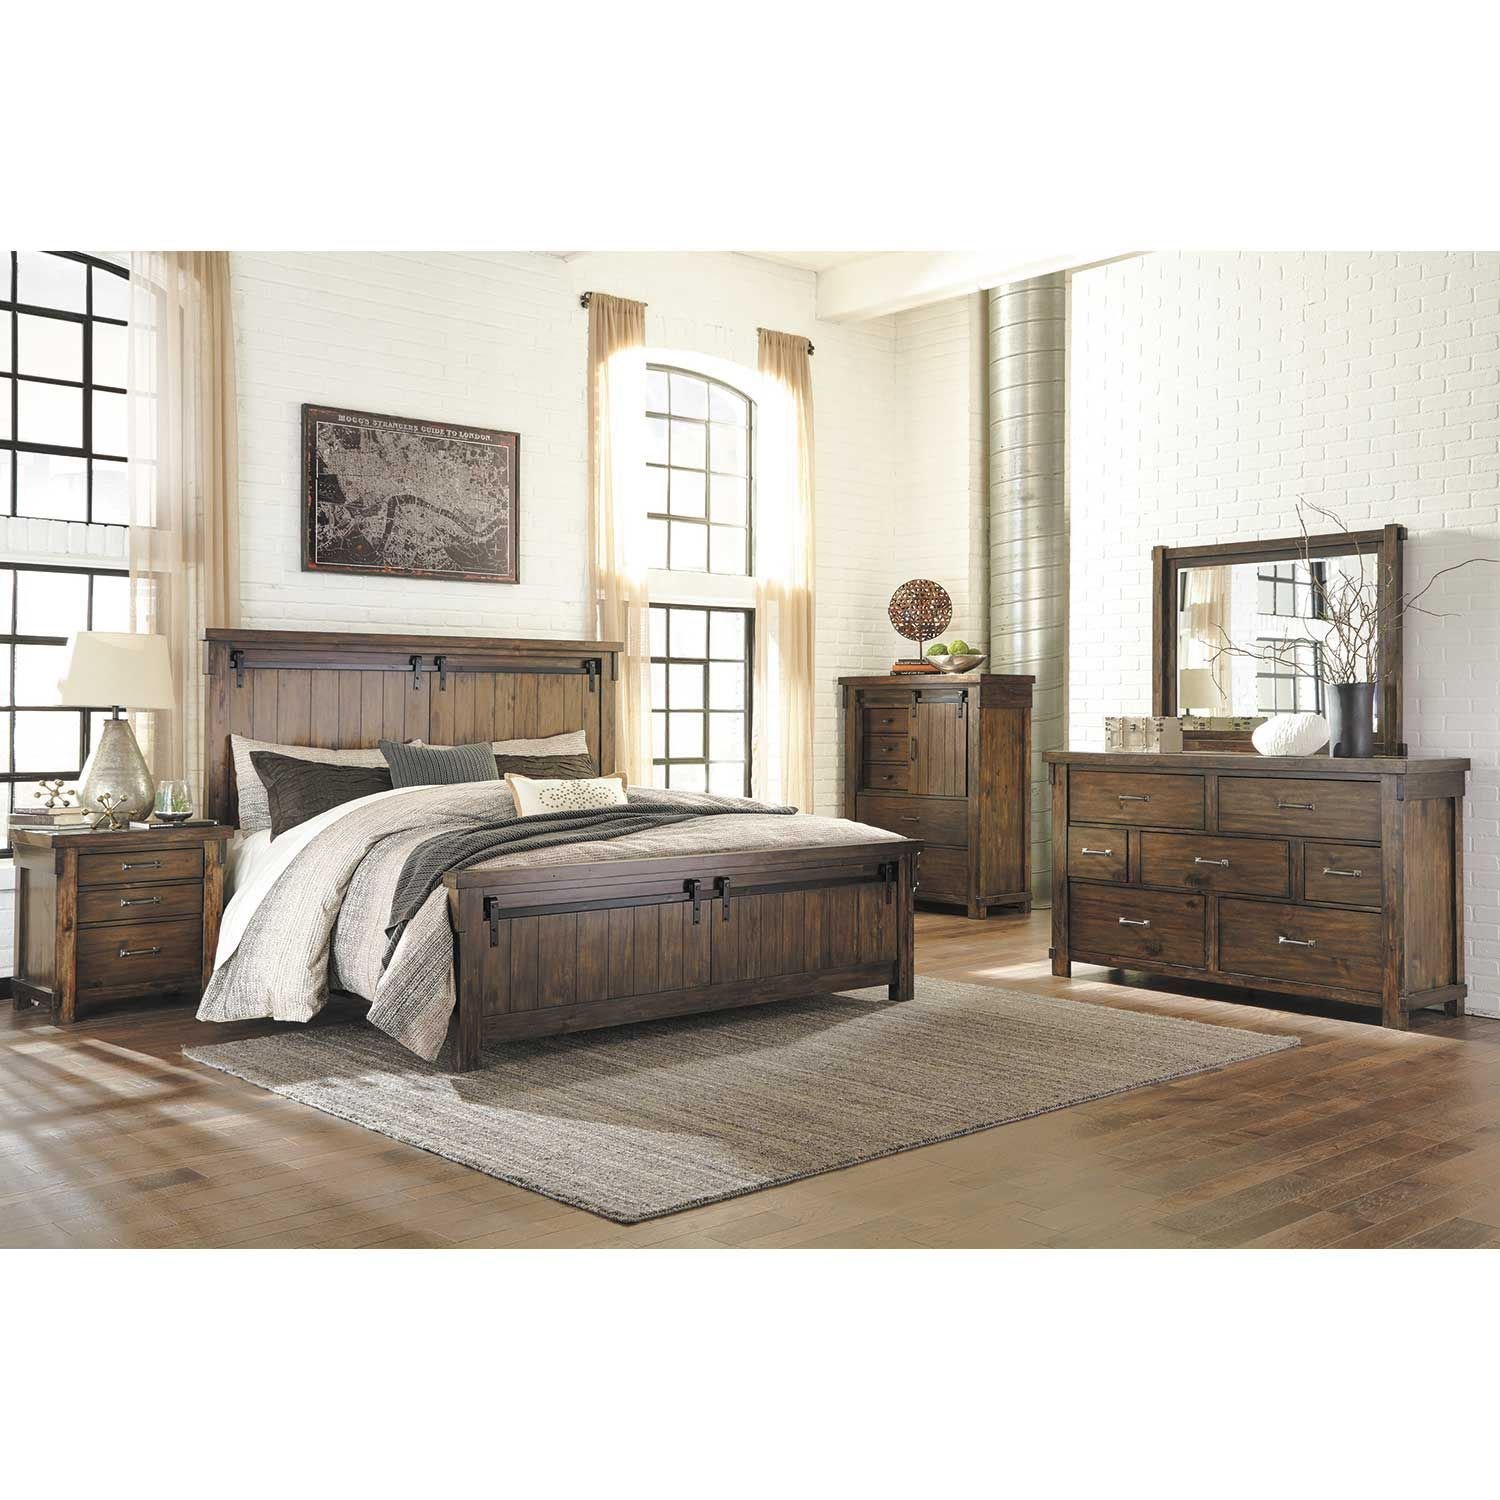 Lakeleigh Queen Panel Bed B718 57 54 96 Ashley Furniture Afw Com